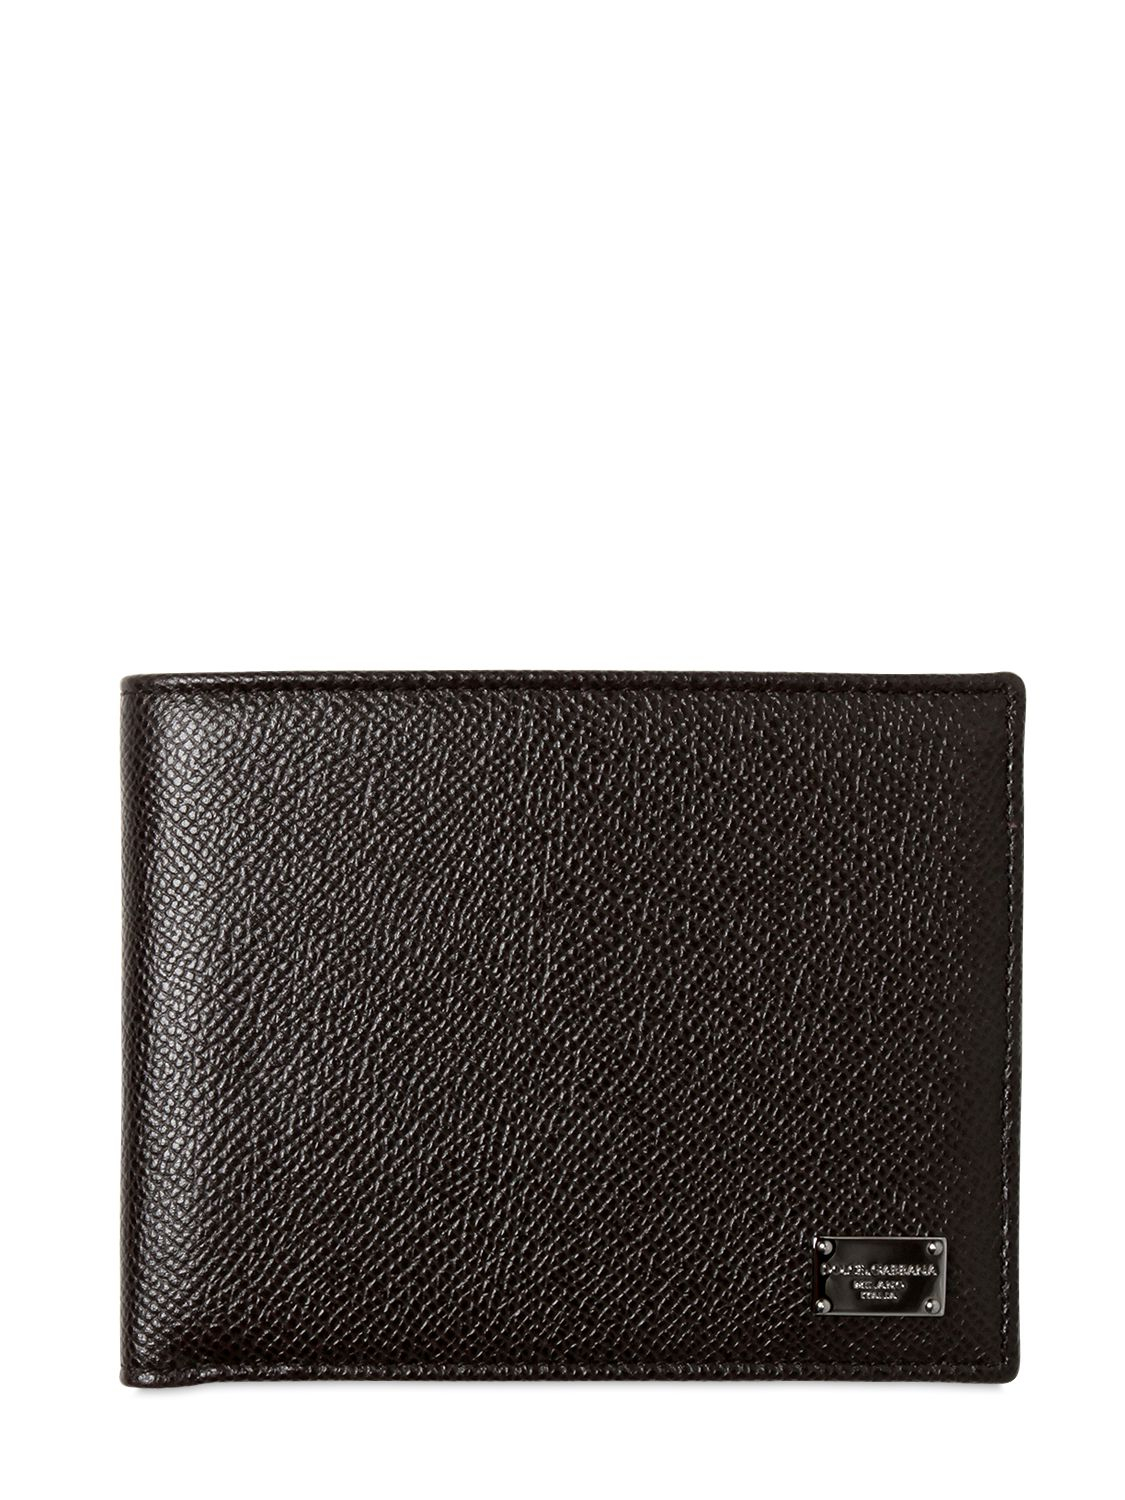 dolce and gabbana wallet mens